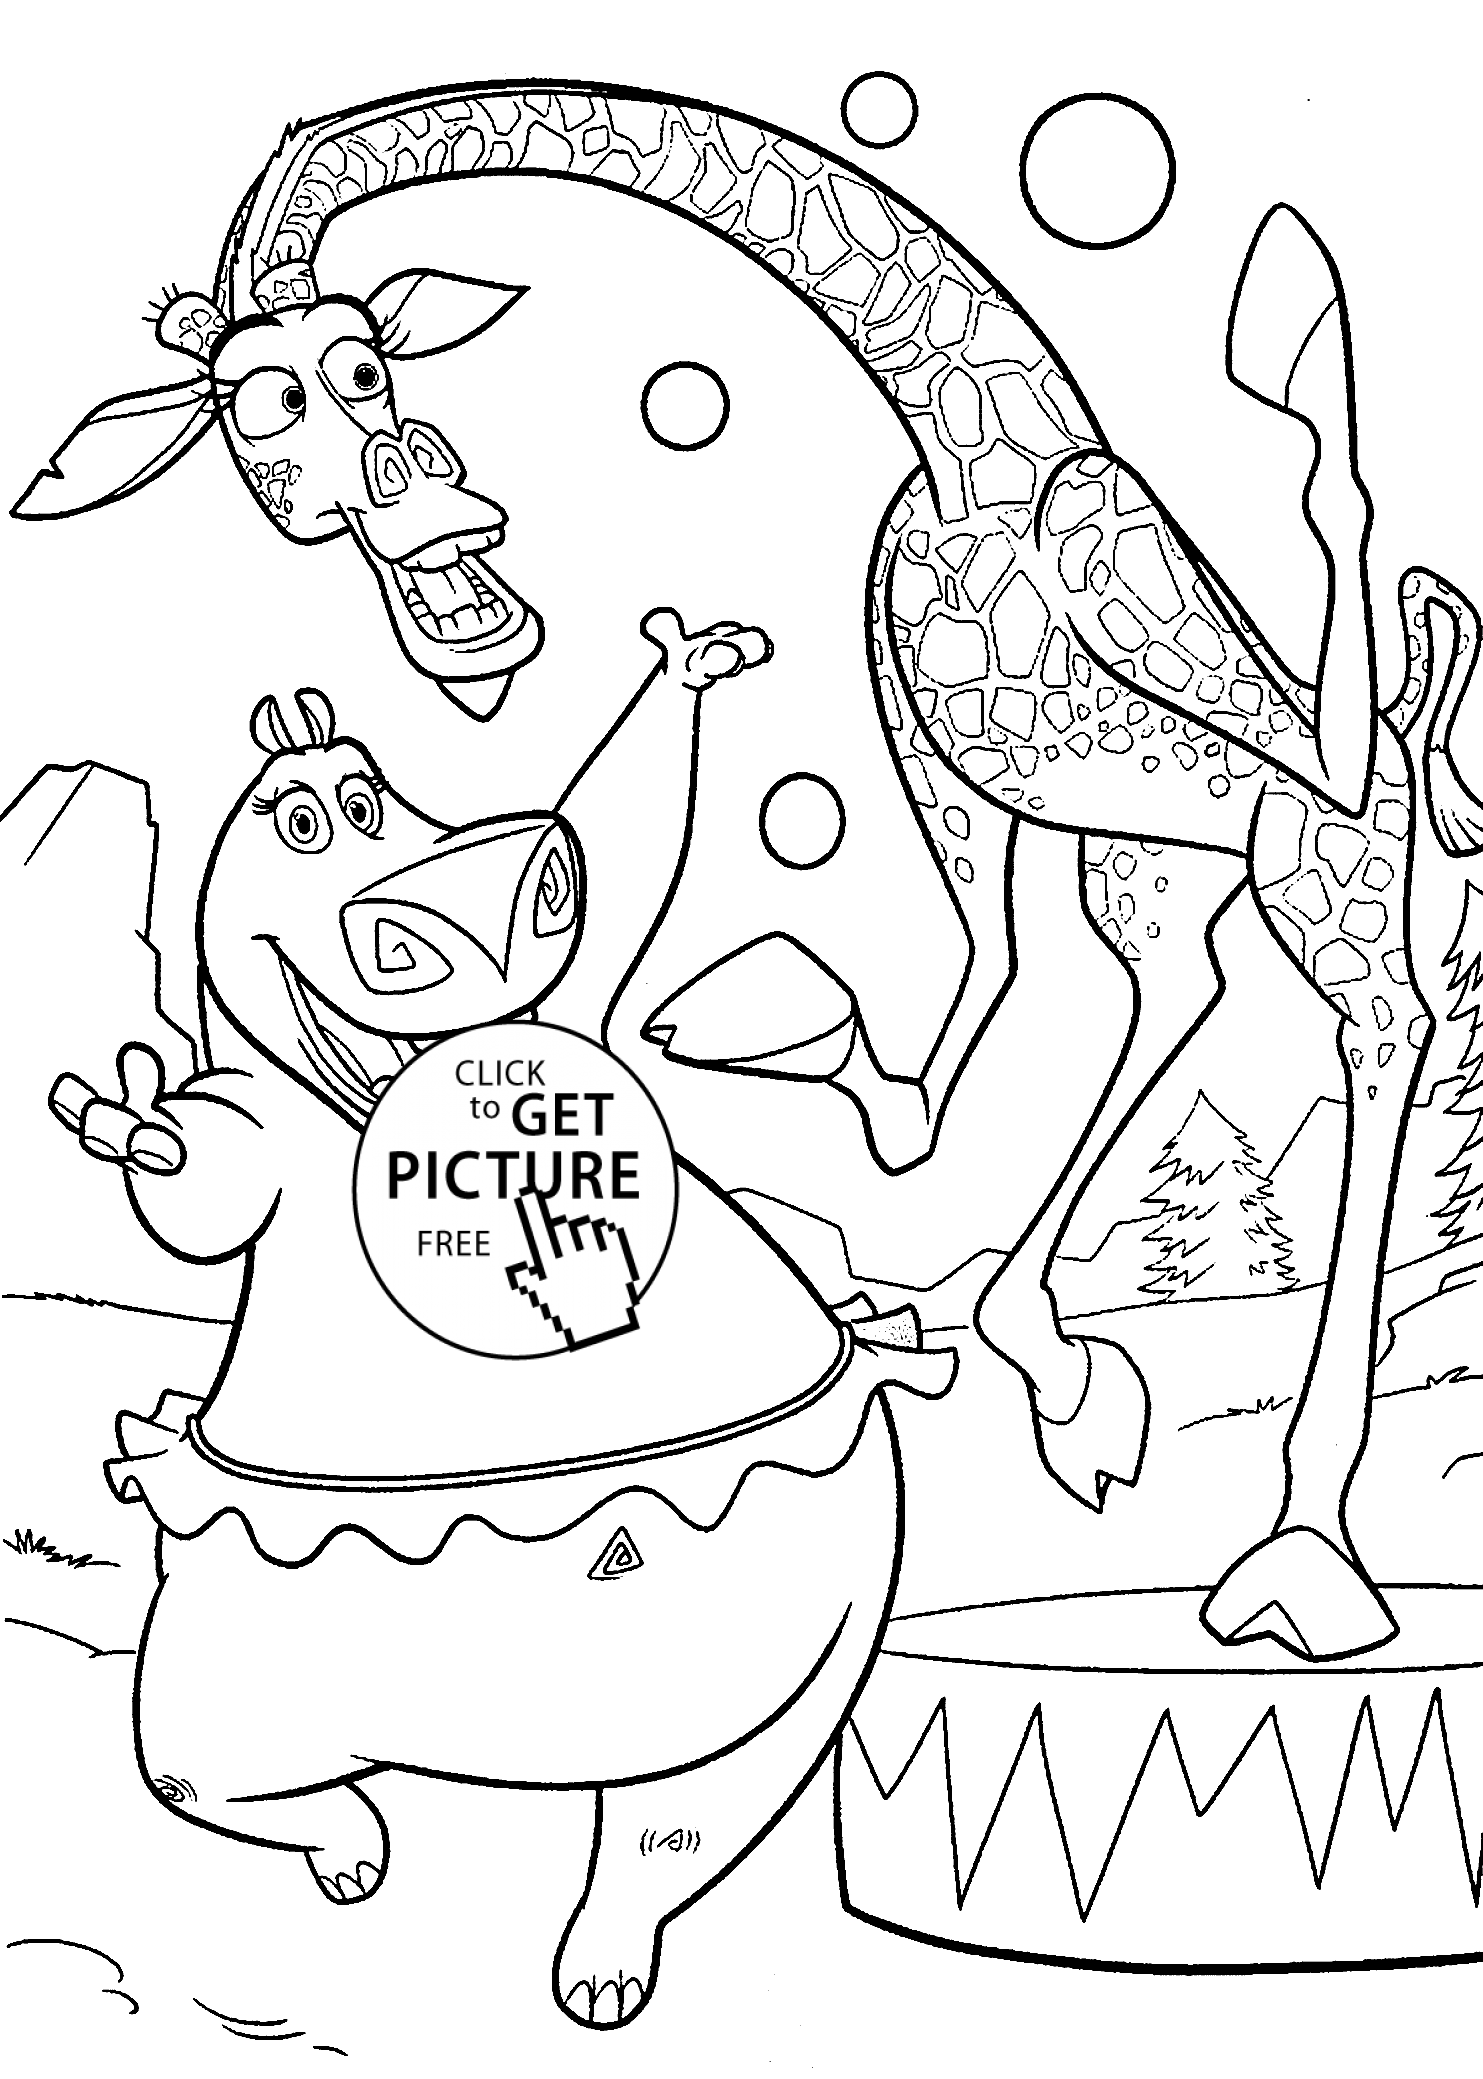 Gloria Madagascar coloring pages for kids, printable free